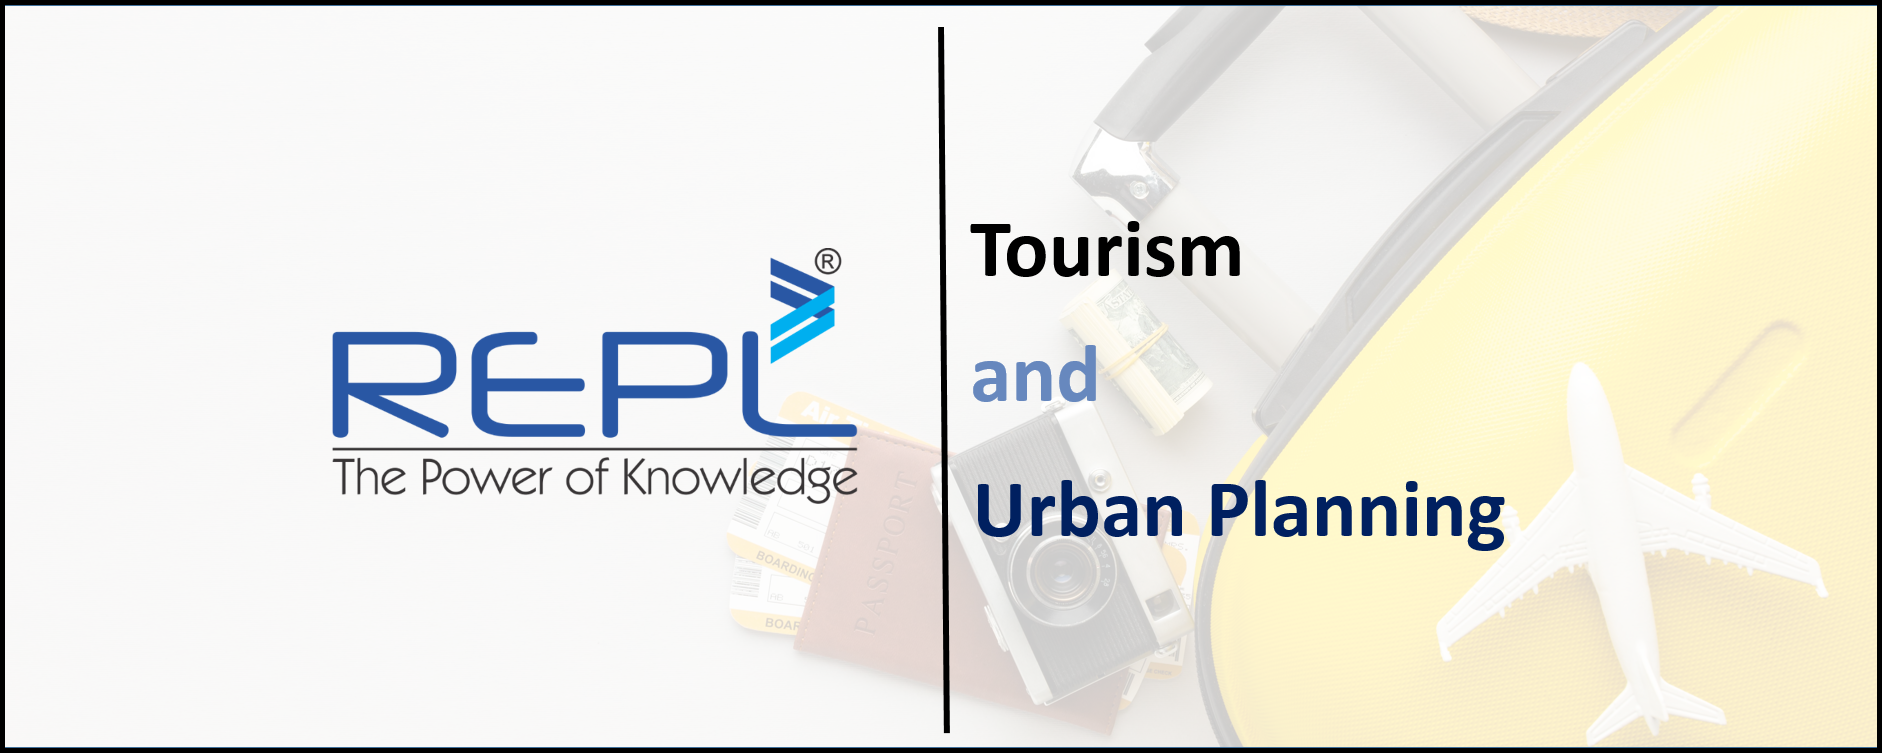 urban tourism planners